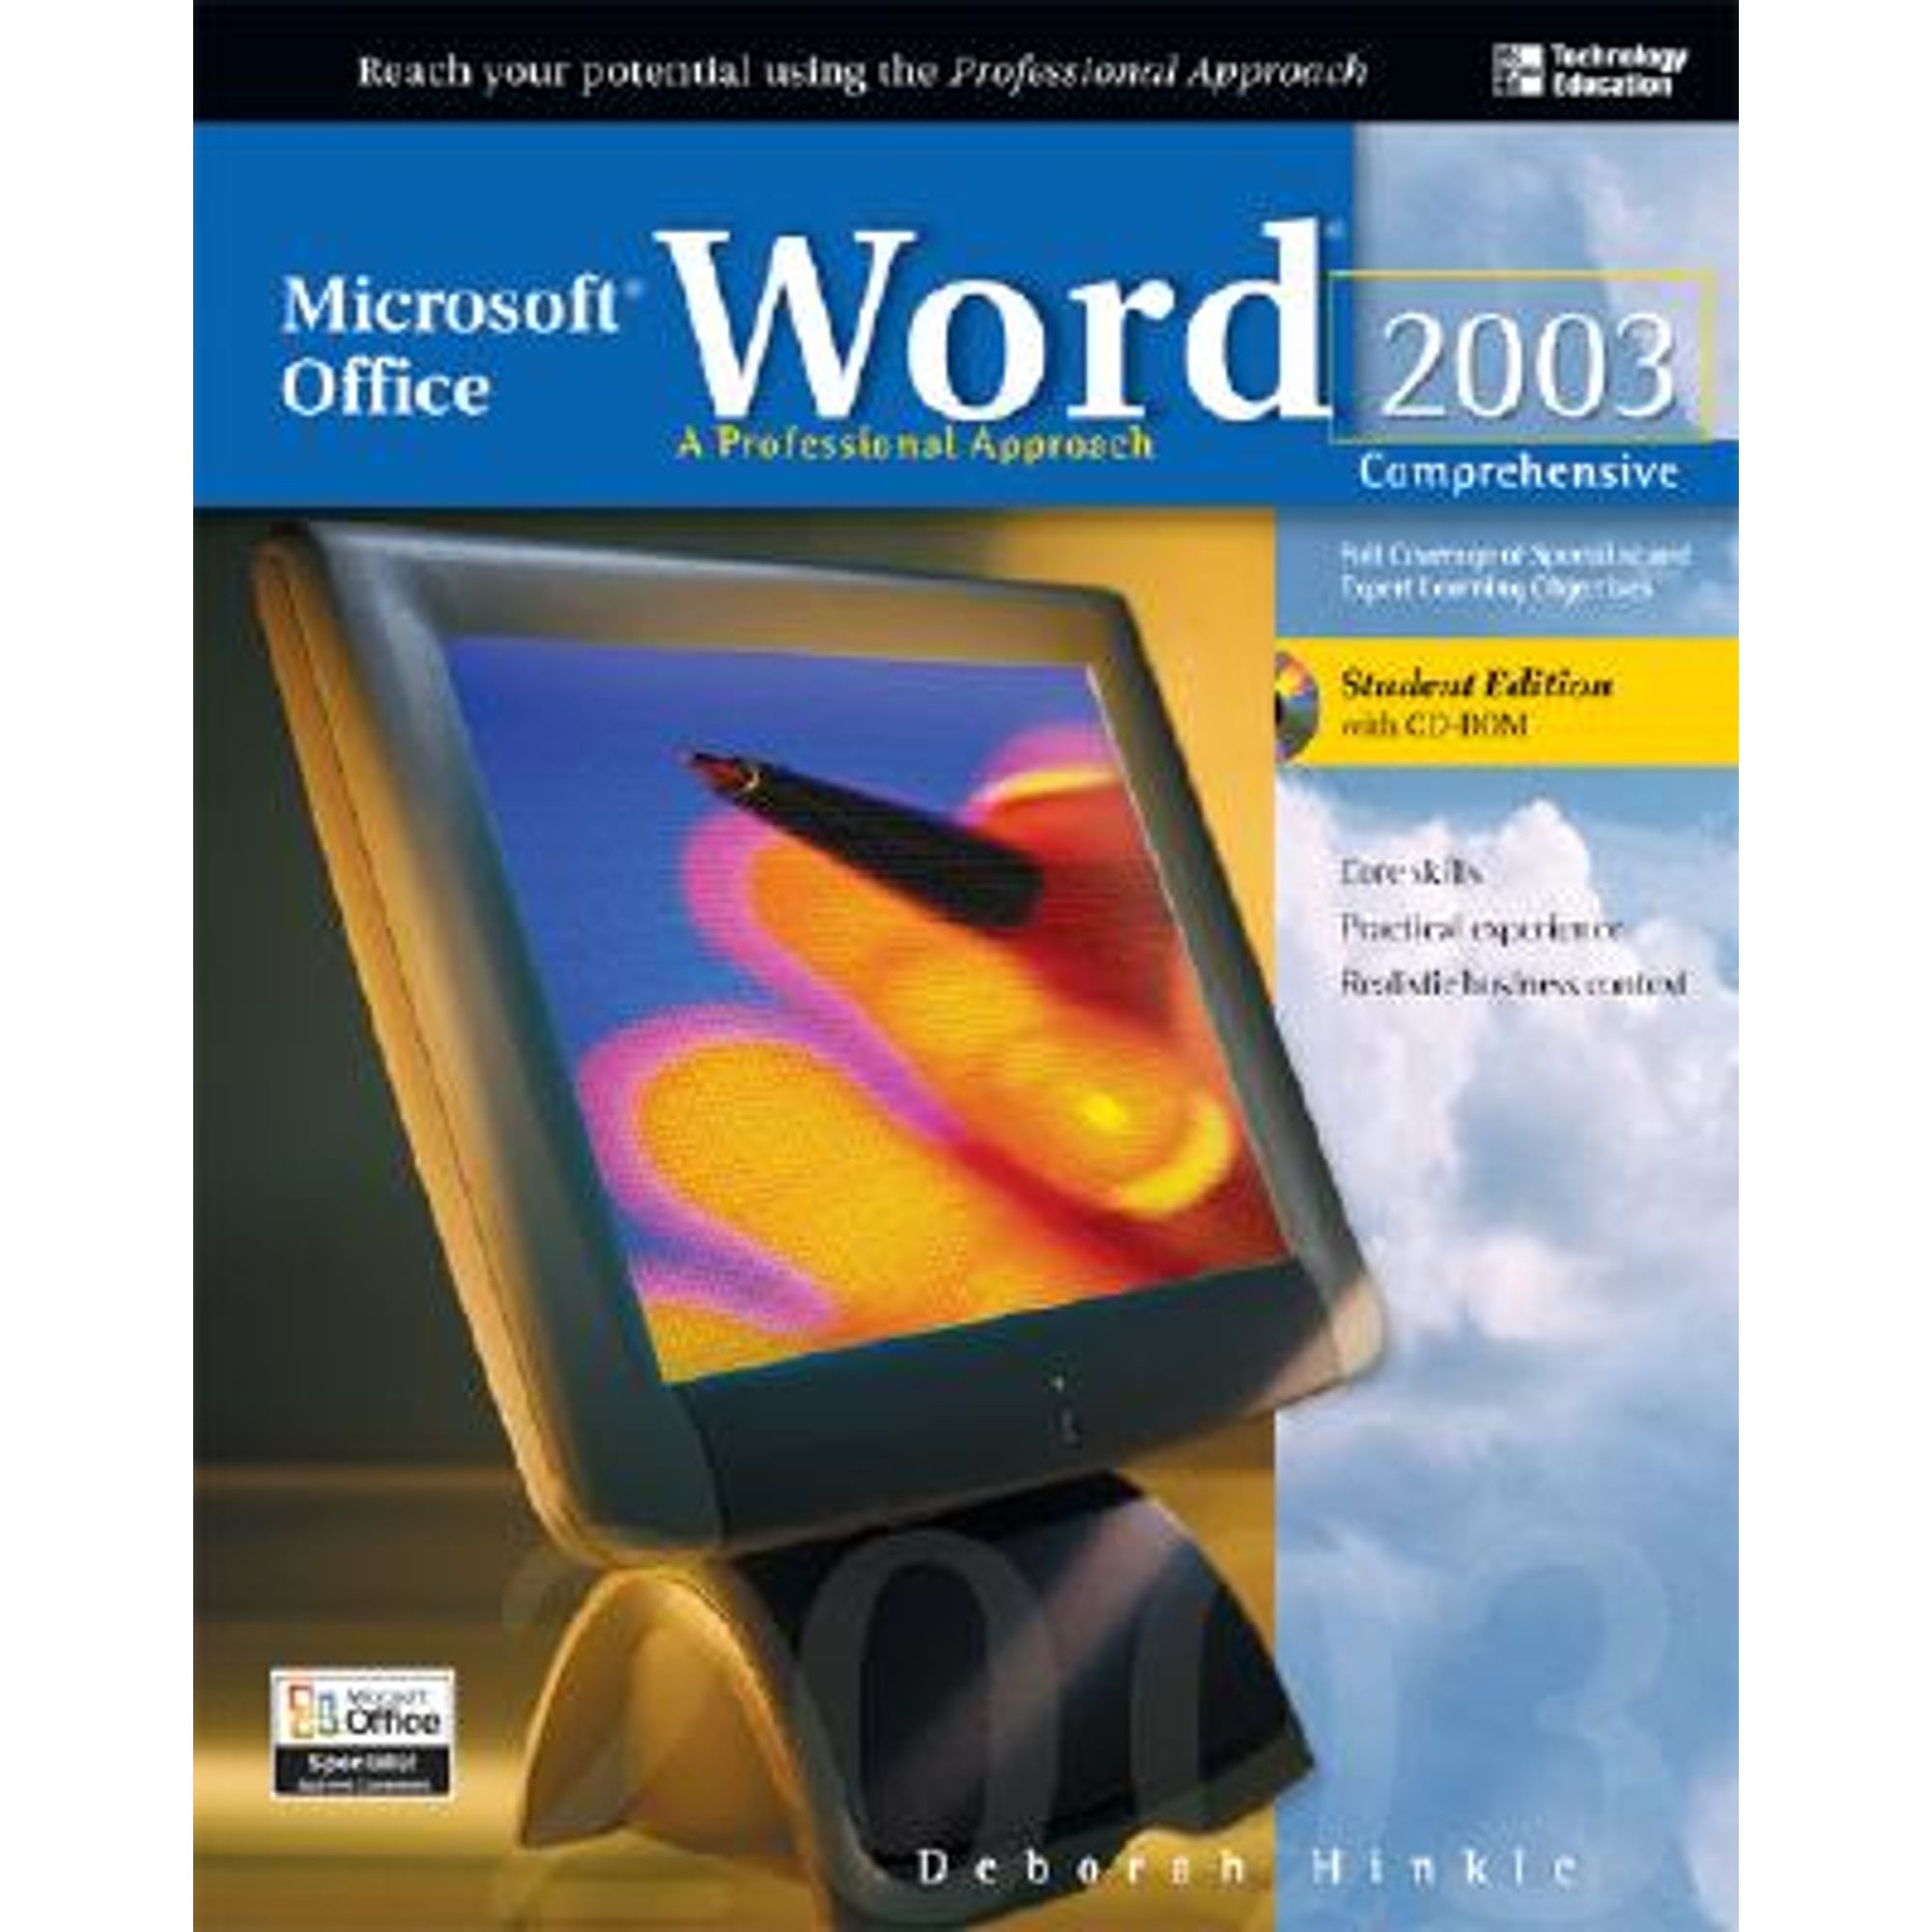 Microsoft Office Word 2003: A Professional Approach, Comprehensive Student  Edition W/ CD-ROM 